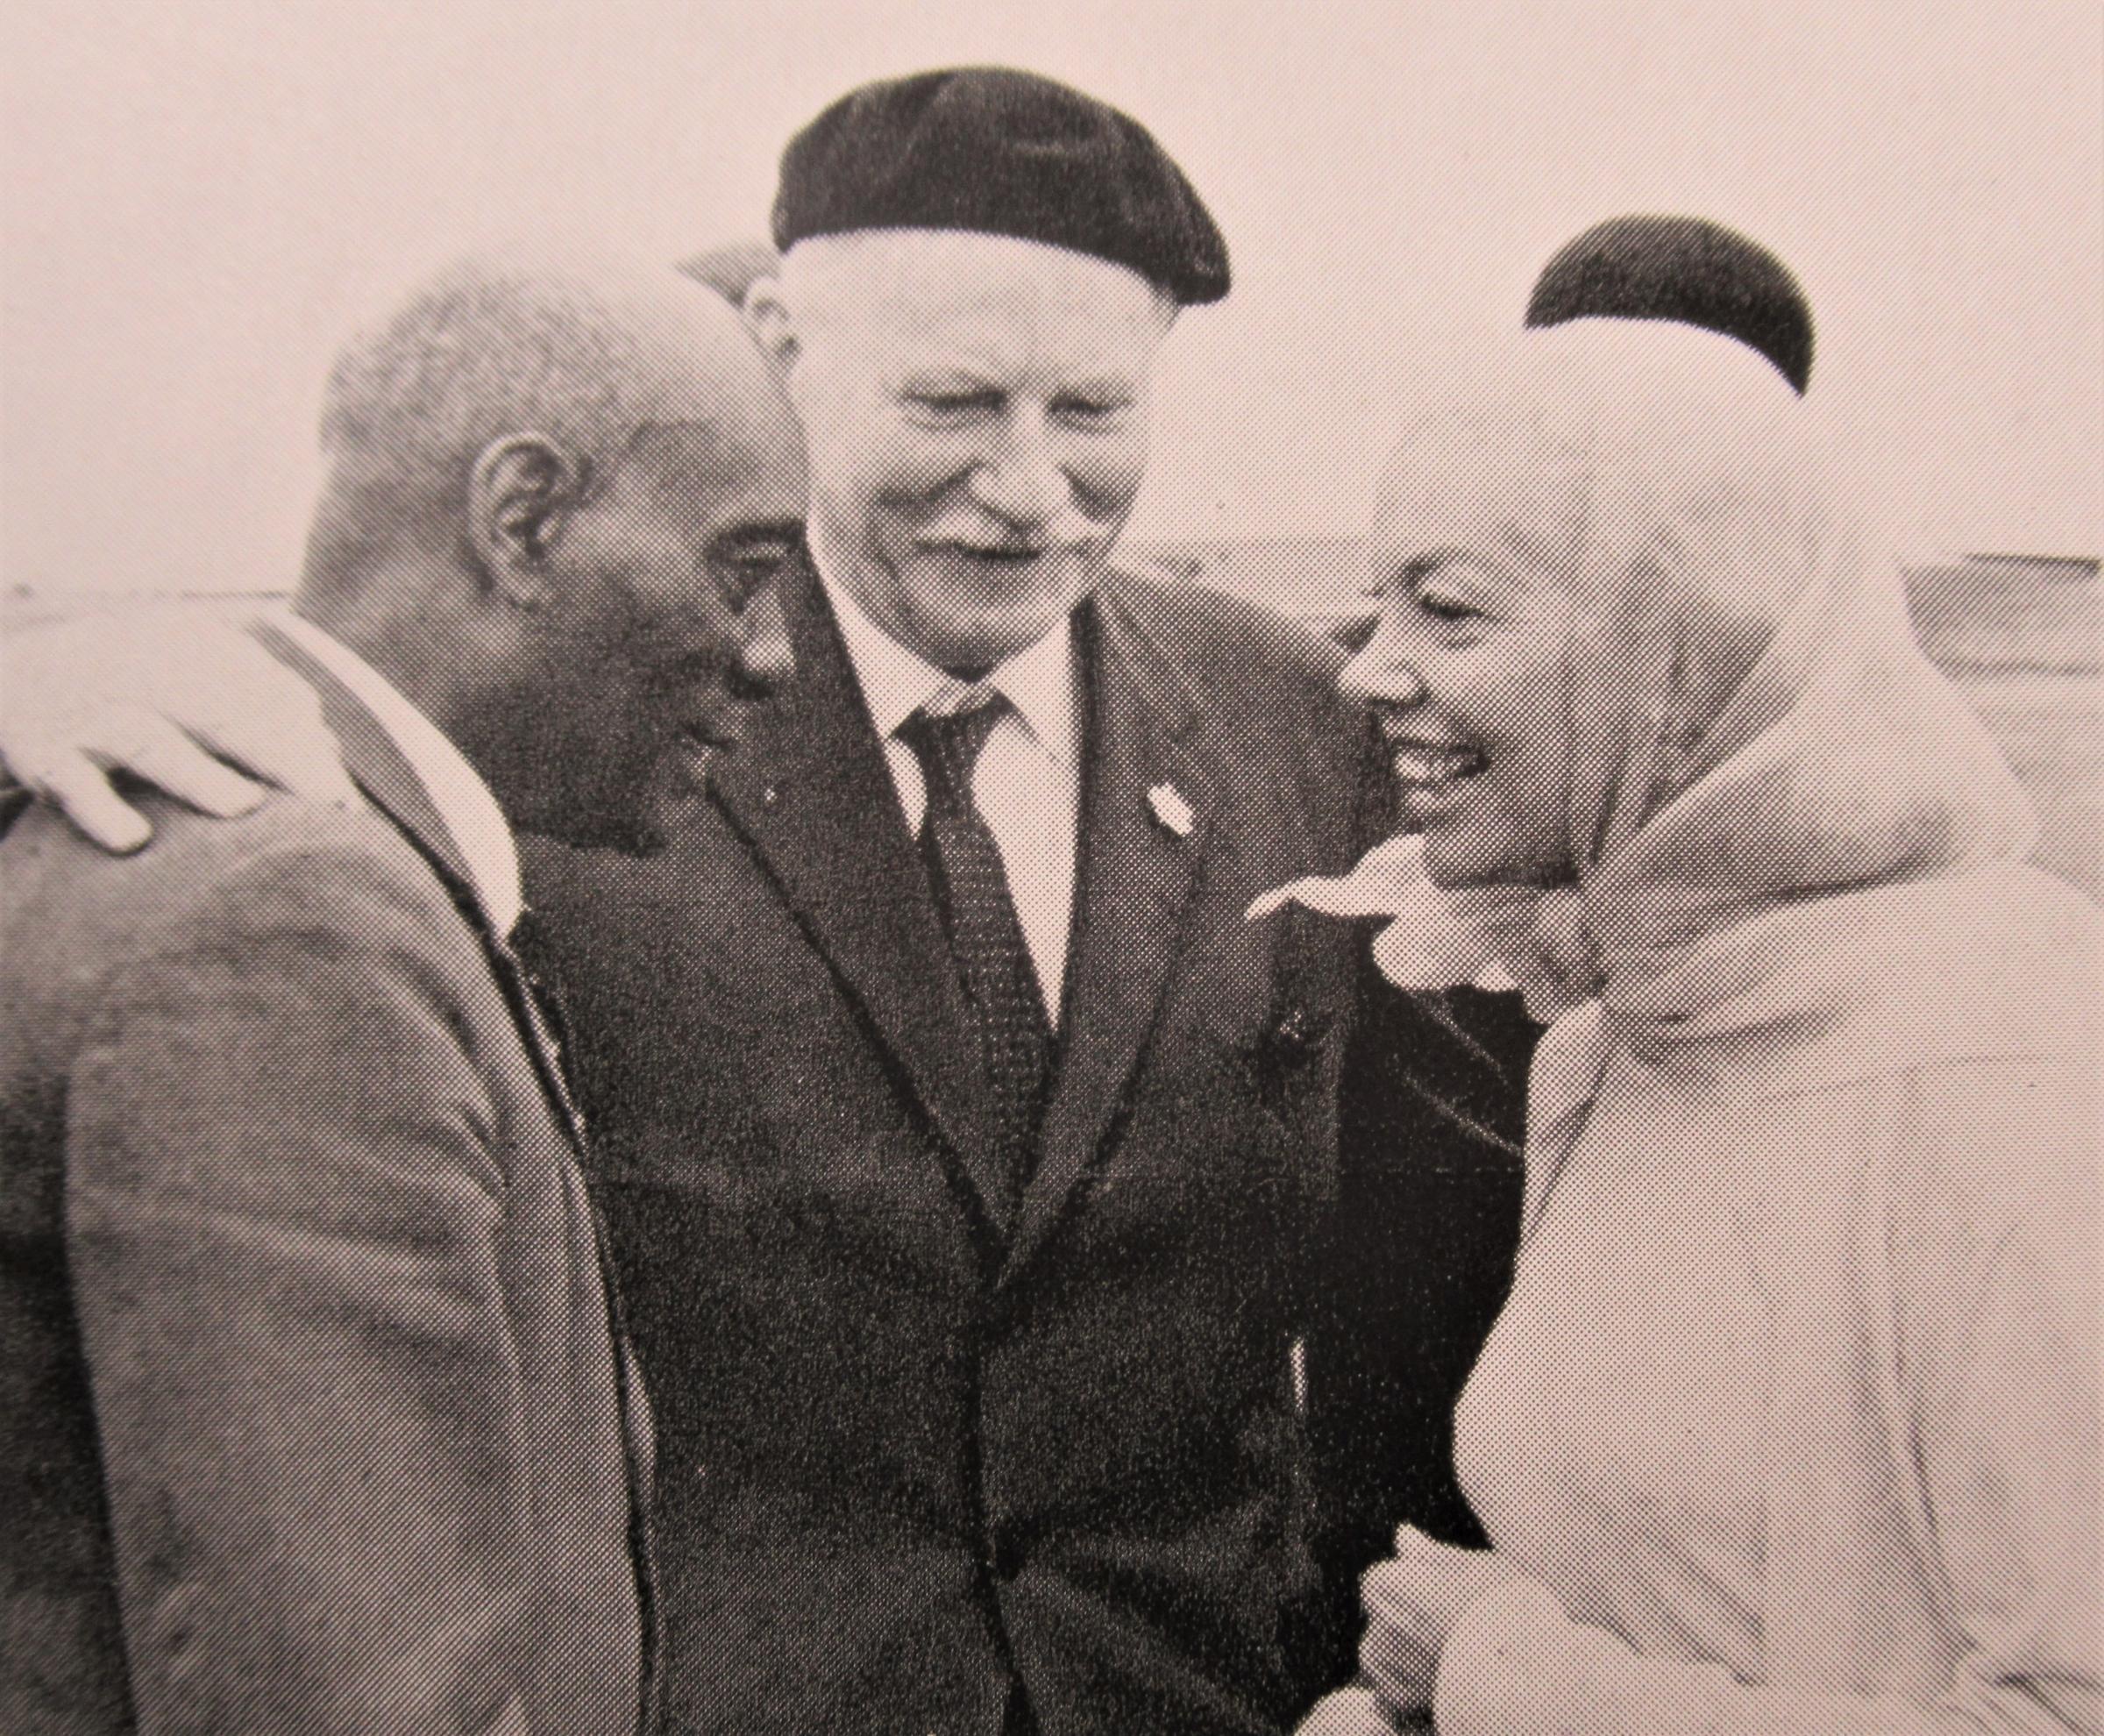 Richard with Michaela Denis and Chief Josiah Njonjo in Kenya. Picture from Richard Barbe Bakers book My Life My Trees.